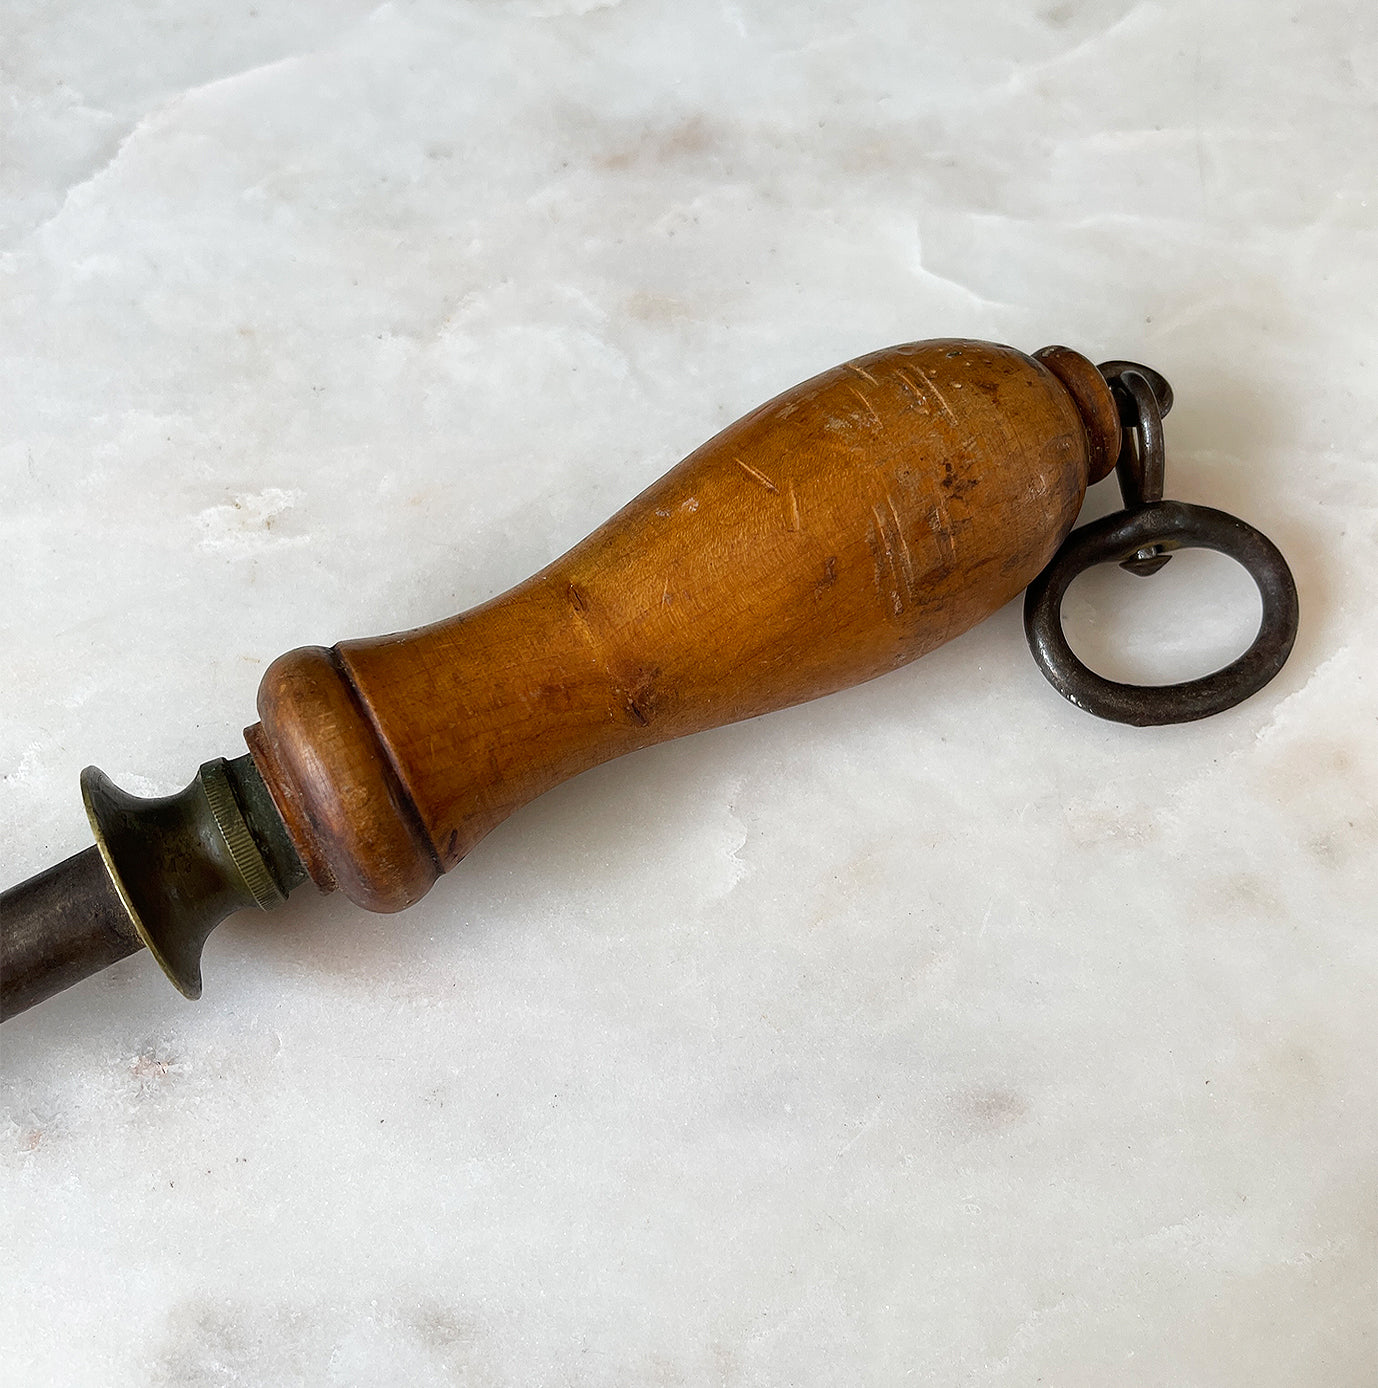 A Victorian English Steel Knife Sharpener with brass shank and sturdy steel hanging hook. Ideal for the period kitchen and keeping your cutlery nice and sharp - SHOP NOW - www.intovintage.co.uk